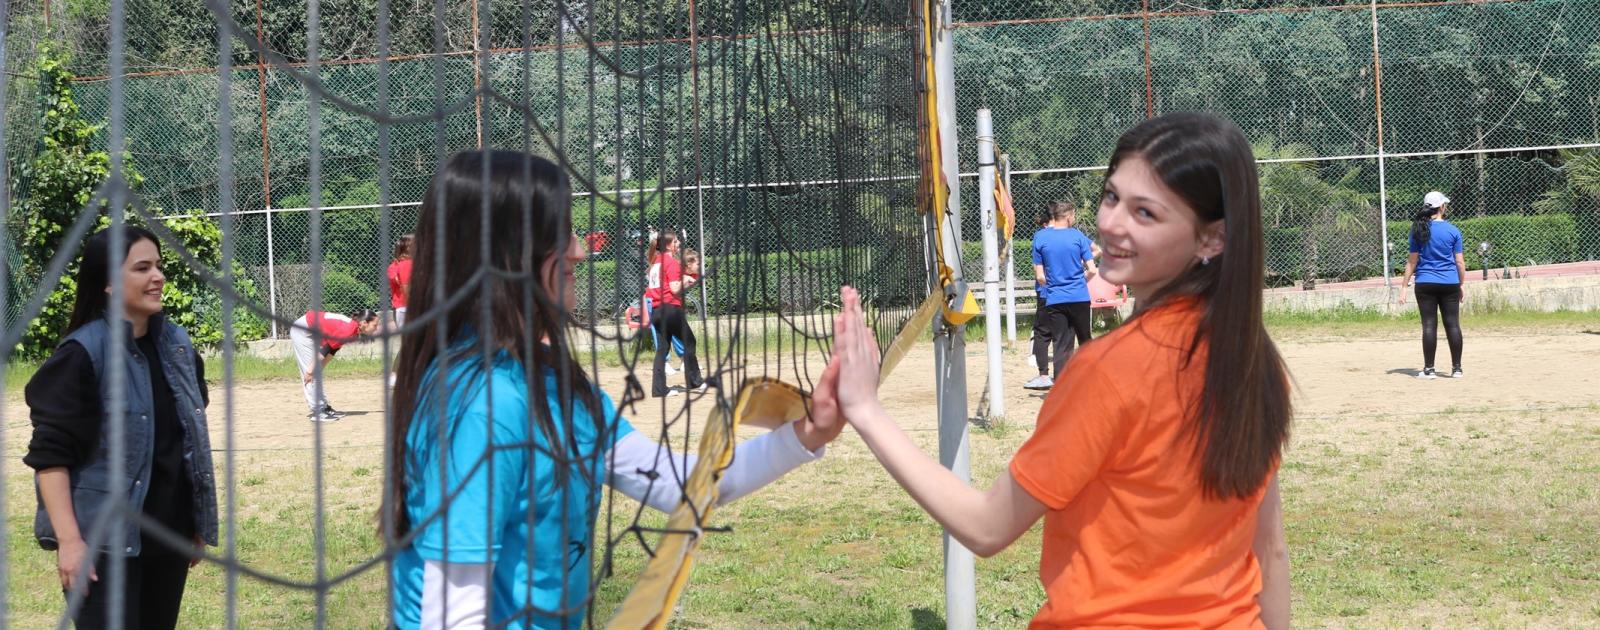 International Day of Sport, Youth from Durrës, Elbasan, Kukës and Tirana Scored for People and Peace